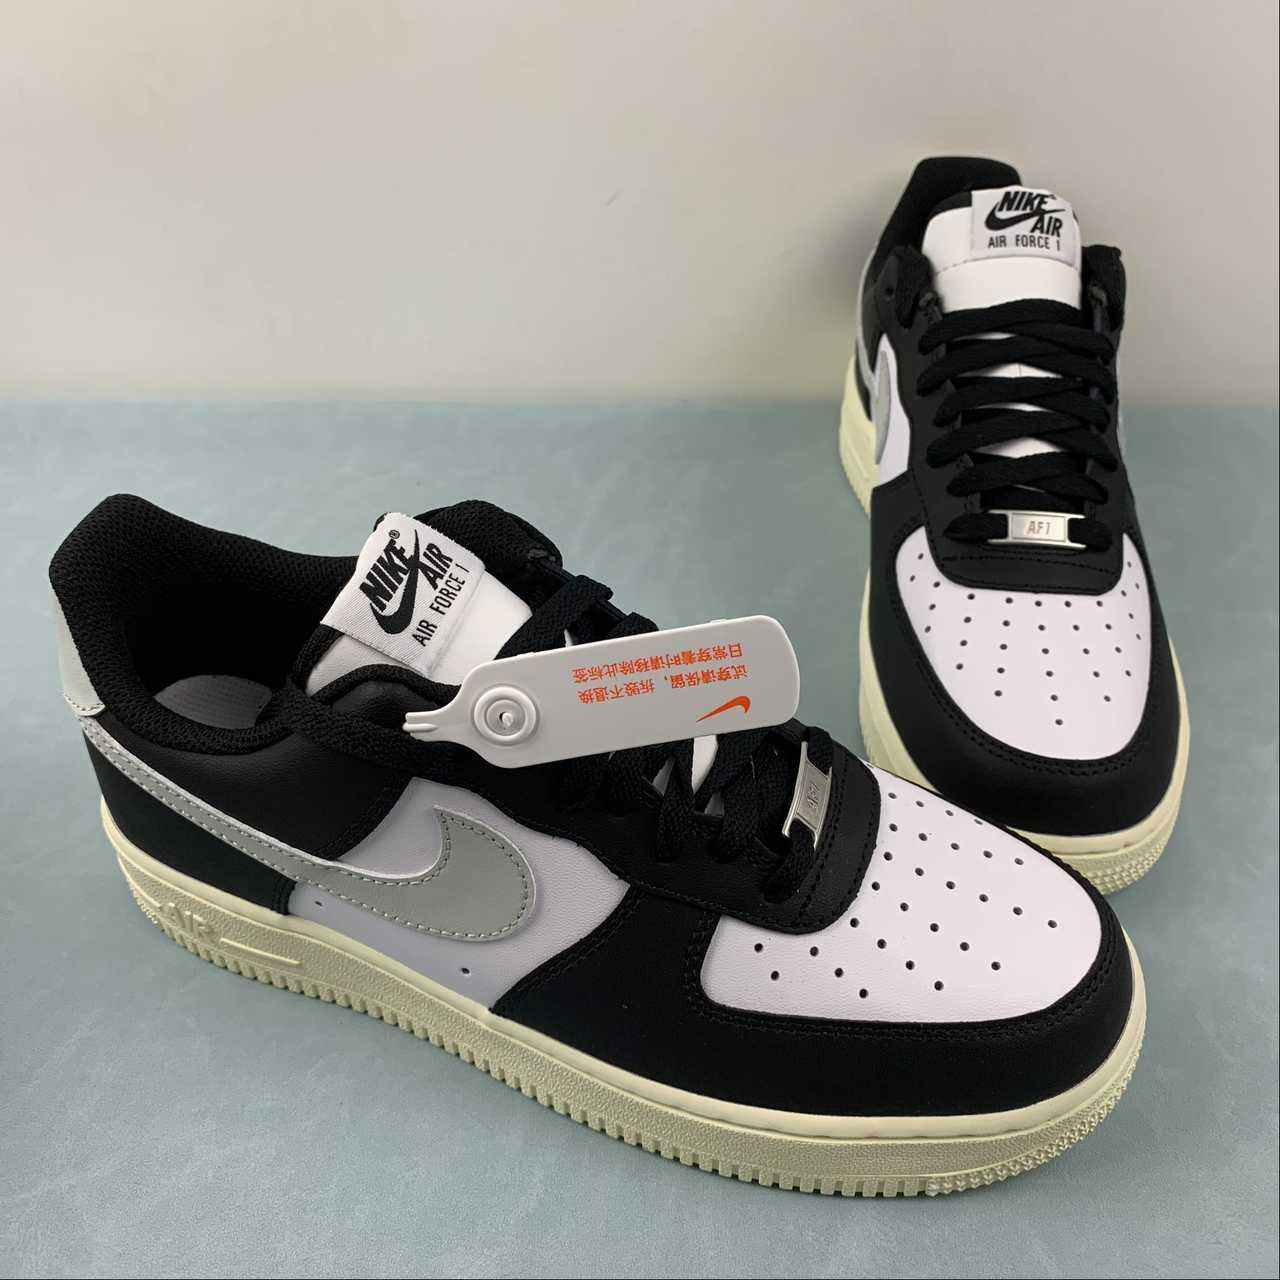 AIR FORCE 1 Air Force low-top casual shoes FQ6848-101 (China Trading ...